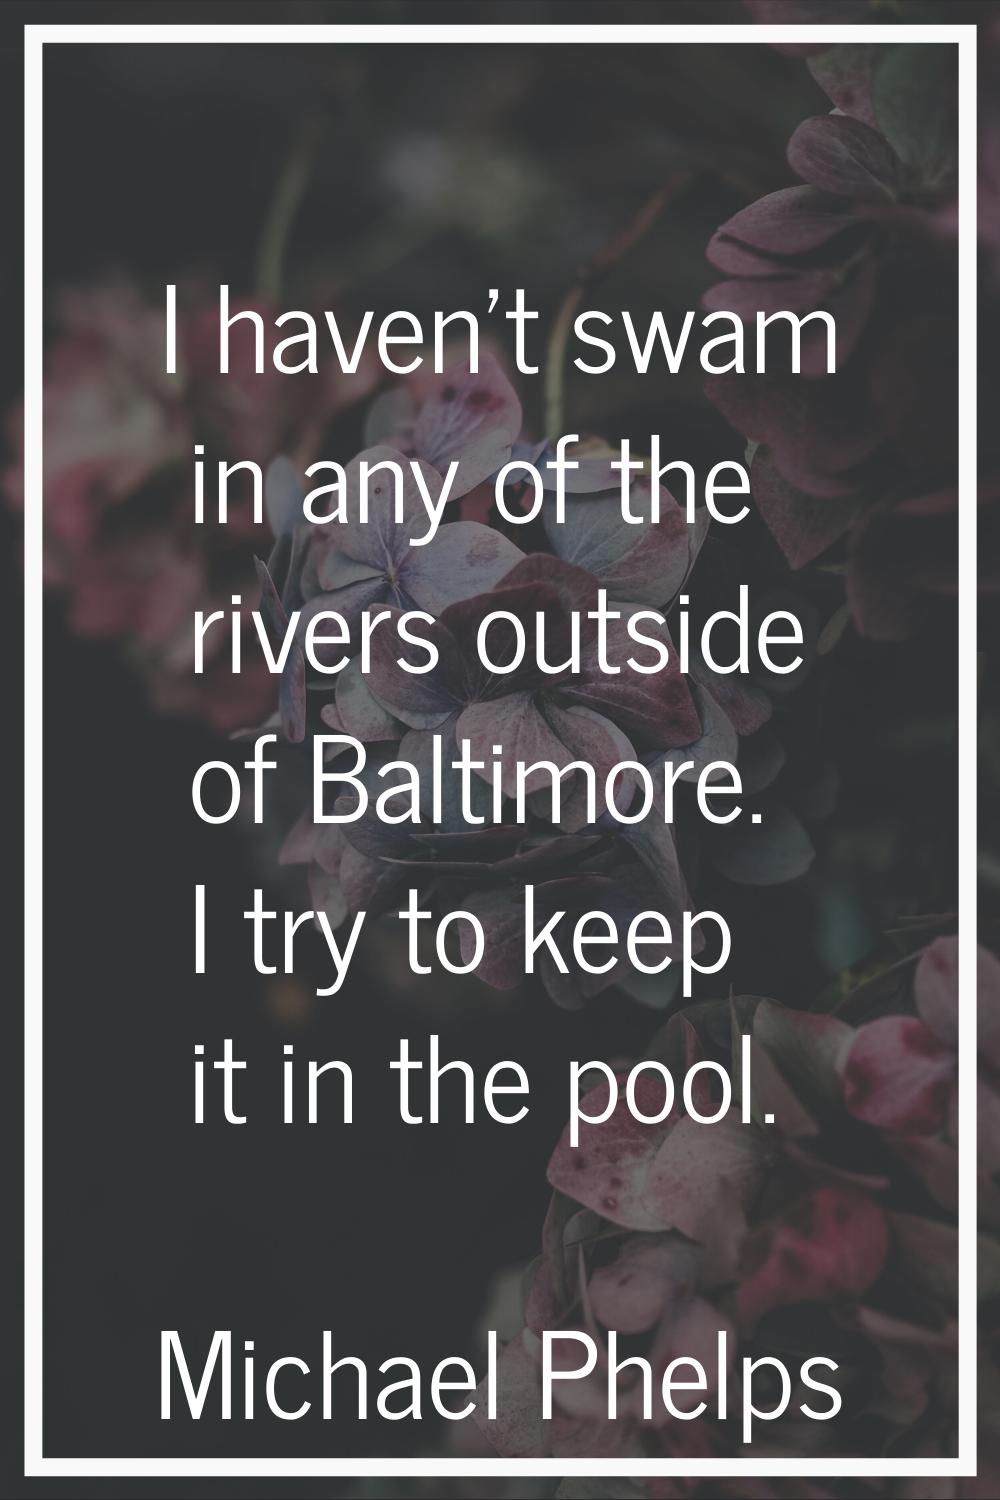 I haven't swam in any of the rivers outside of Baltimore. I try to keep it in the pool.